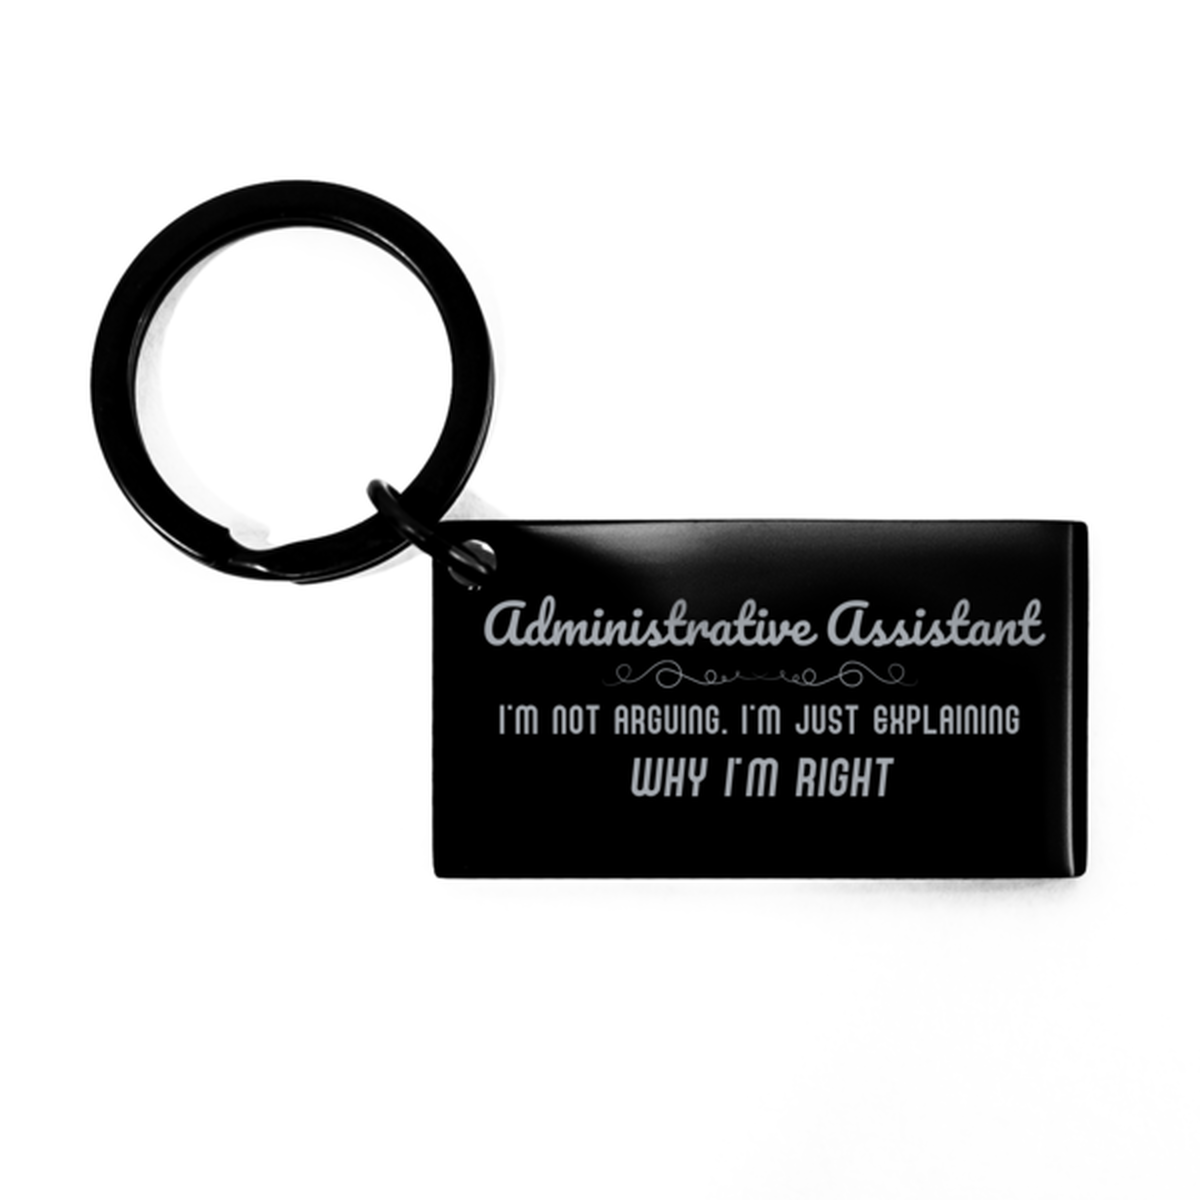 Administrative Assistant I'm not Arguing. I'm Just Explaining Why I'm RIGHT Keychain, Funny Saying Quote Administrative Assistant Gifts For Administrative Assistant Graduation Birthday Christmas Gifts for Men Women Coworker